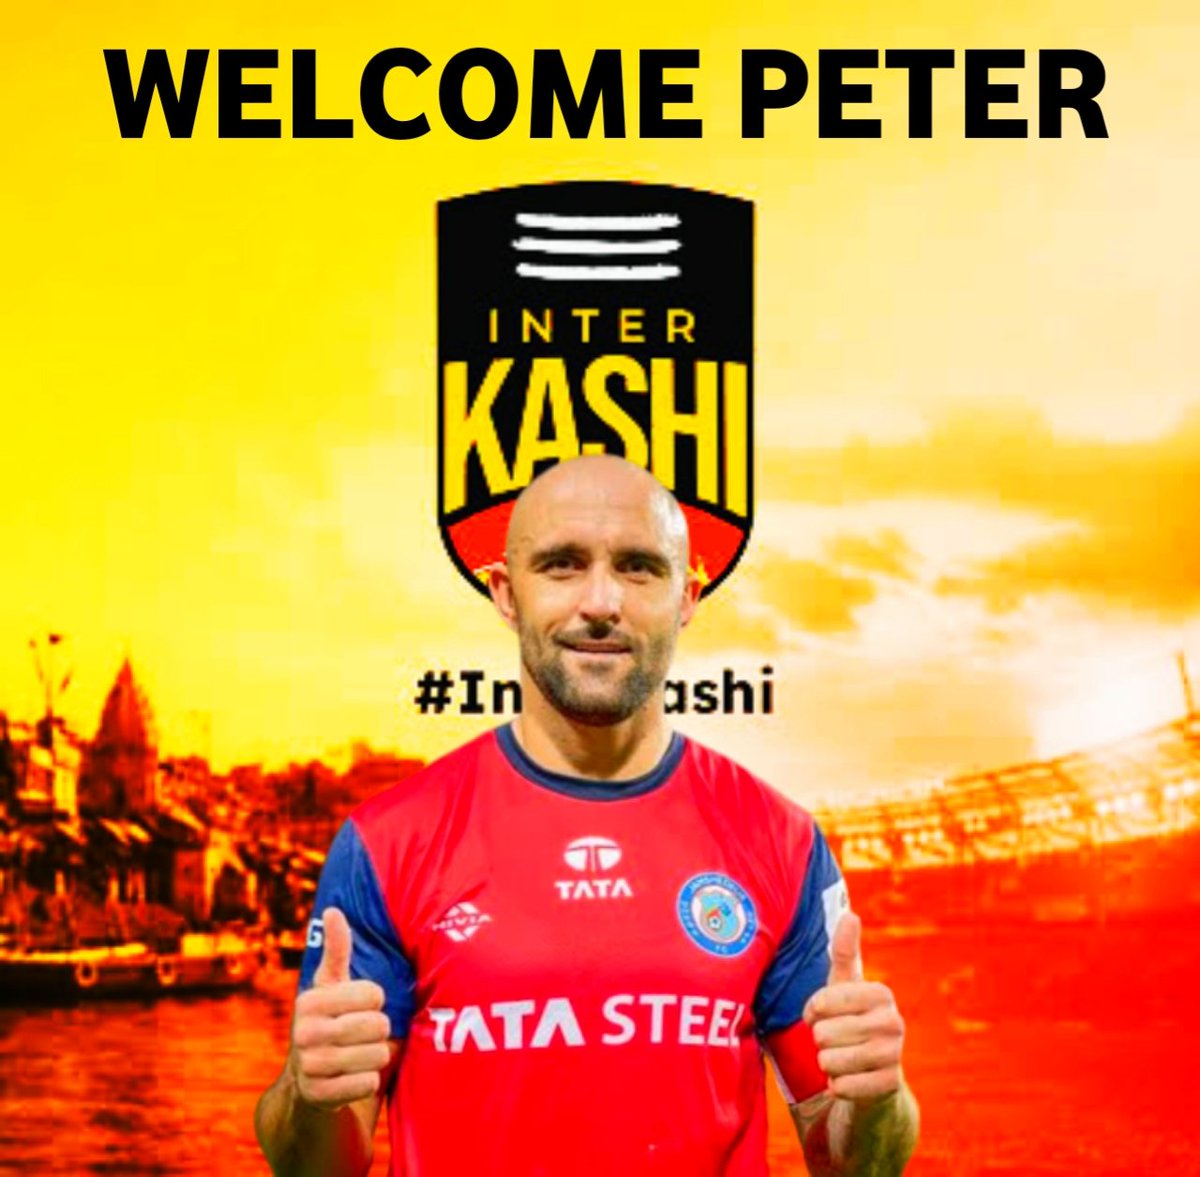 𝗪𝗘𝗟𝗖𝗢𝗠𝗘 𝗧𝗢 𝗞𝗔𝗦𝗛𝗜 🧡🖤

After ISL, Peter is now ready to conquer I League with us. 

#InterKashi #HarHarMahadevॐ 
#HeroILeague #IndianFootball